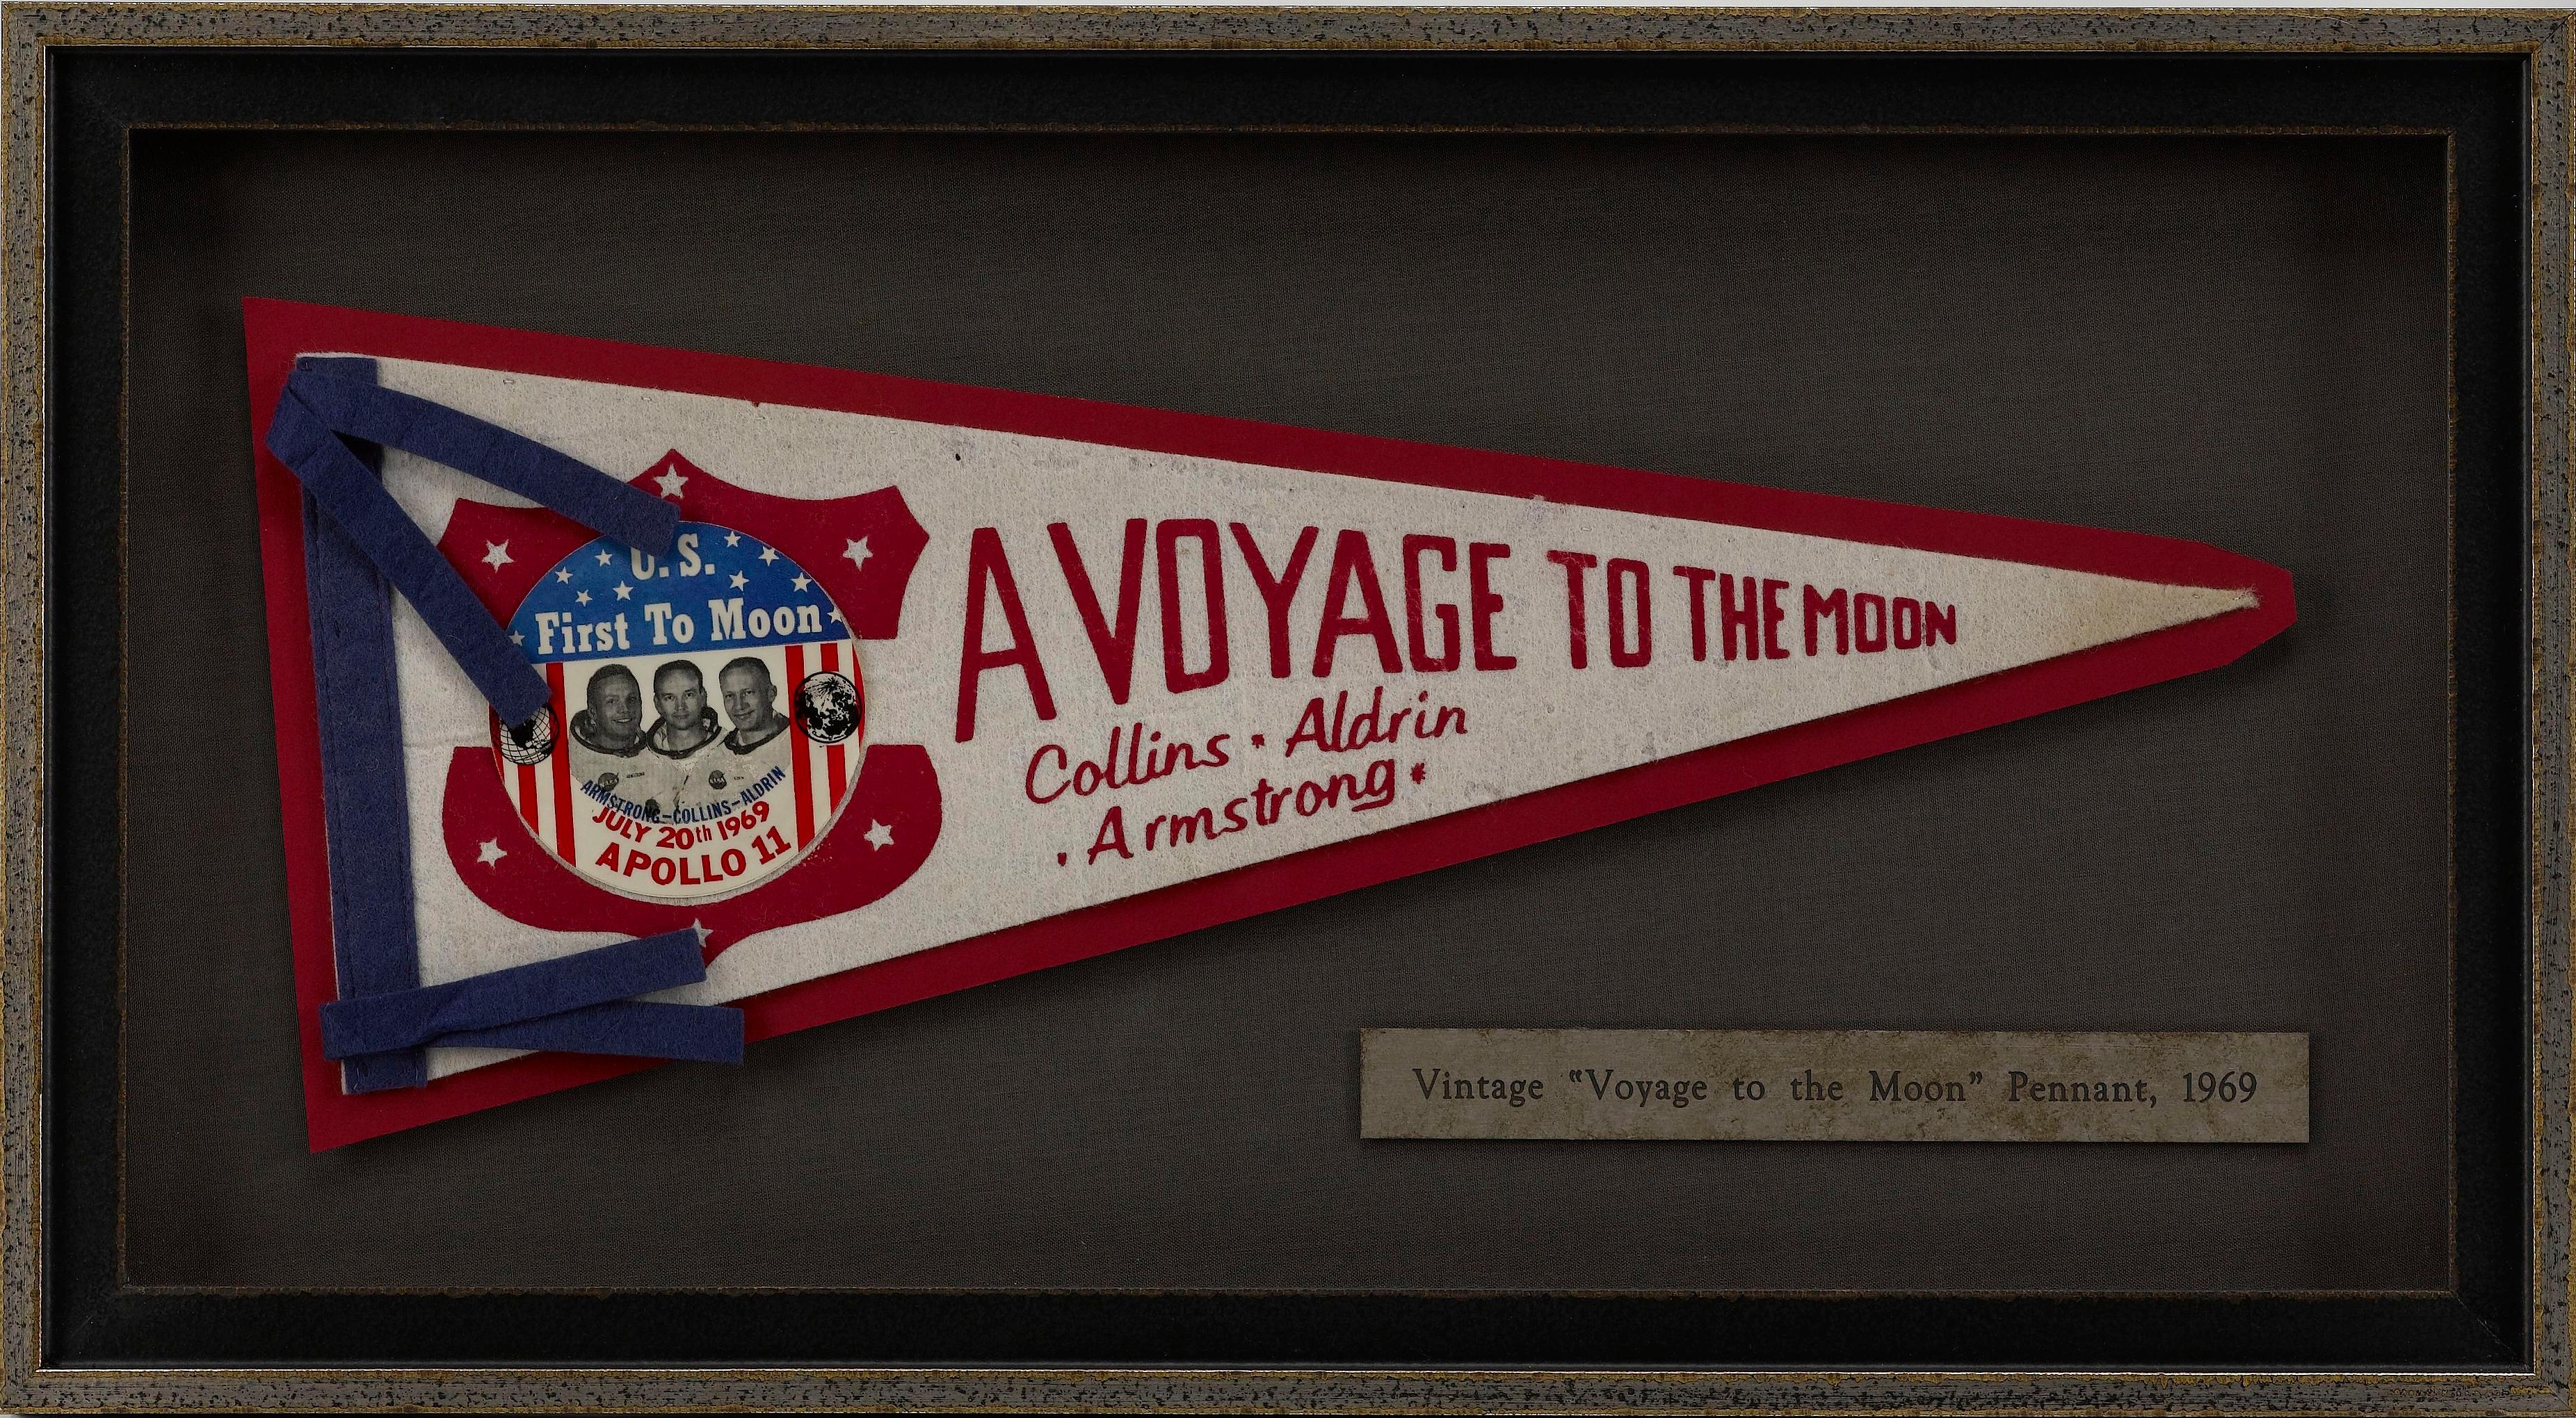 Presented is a vintage pennant from 1969 highlighting the Apollo 11 space mission. The felt pennant features a white field with the words 